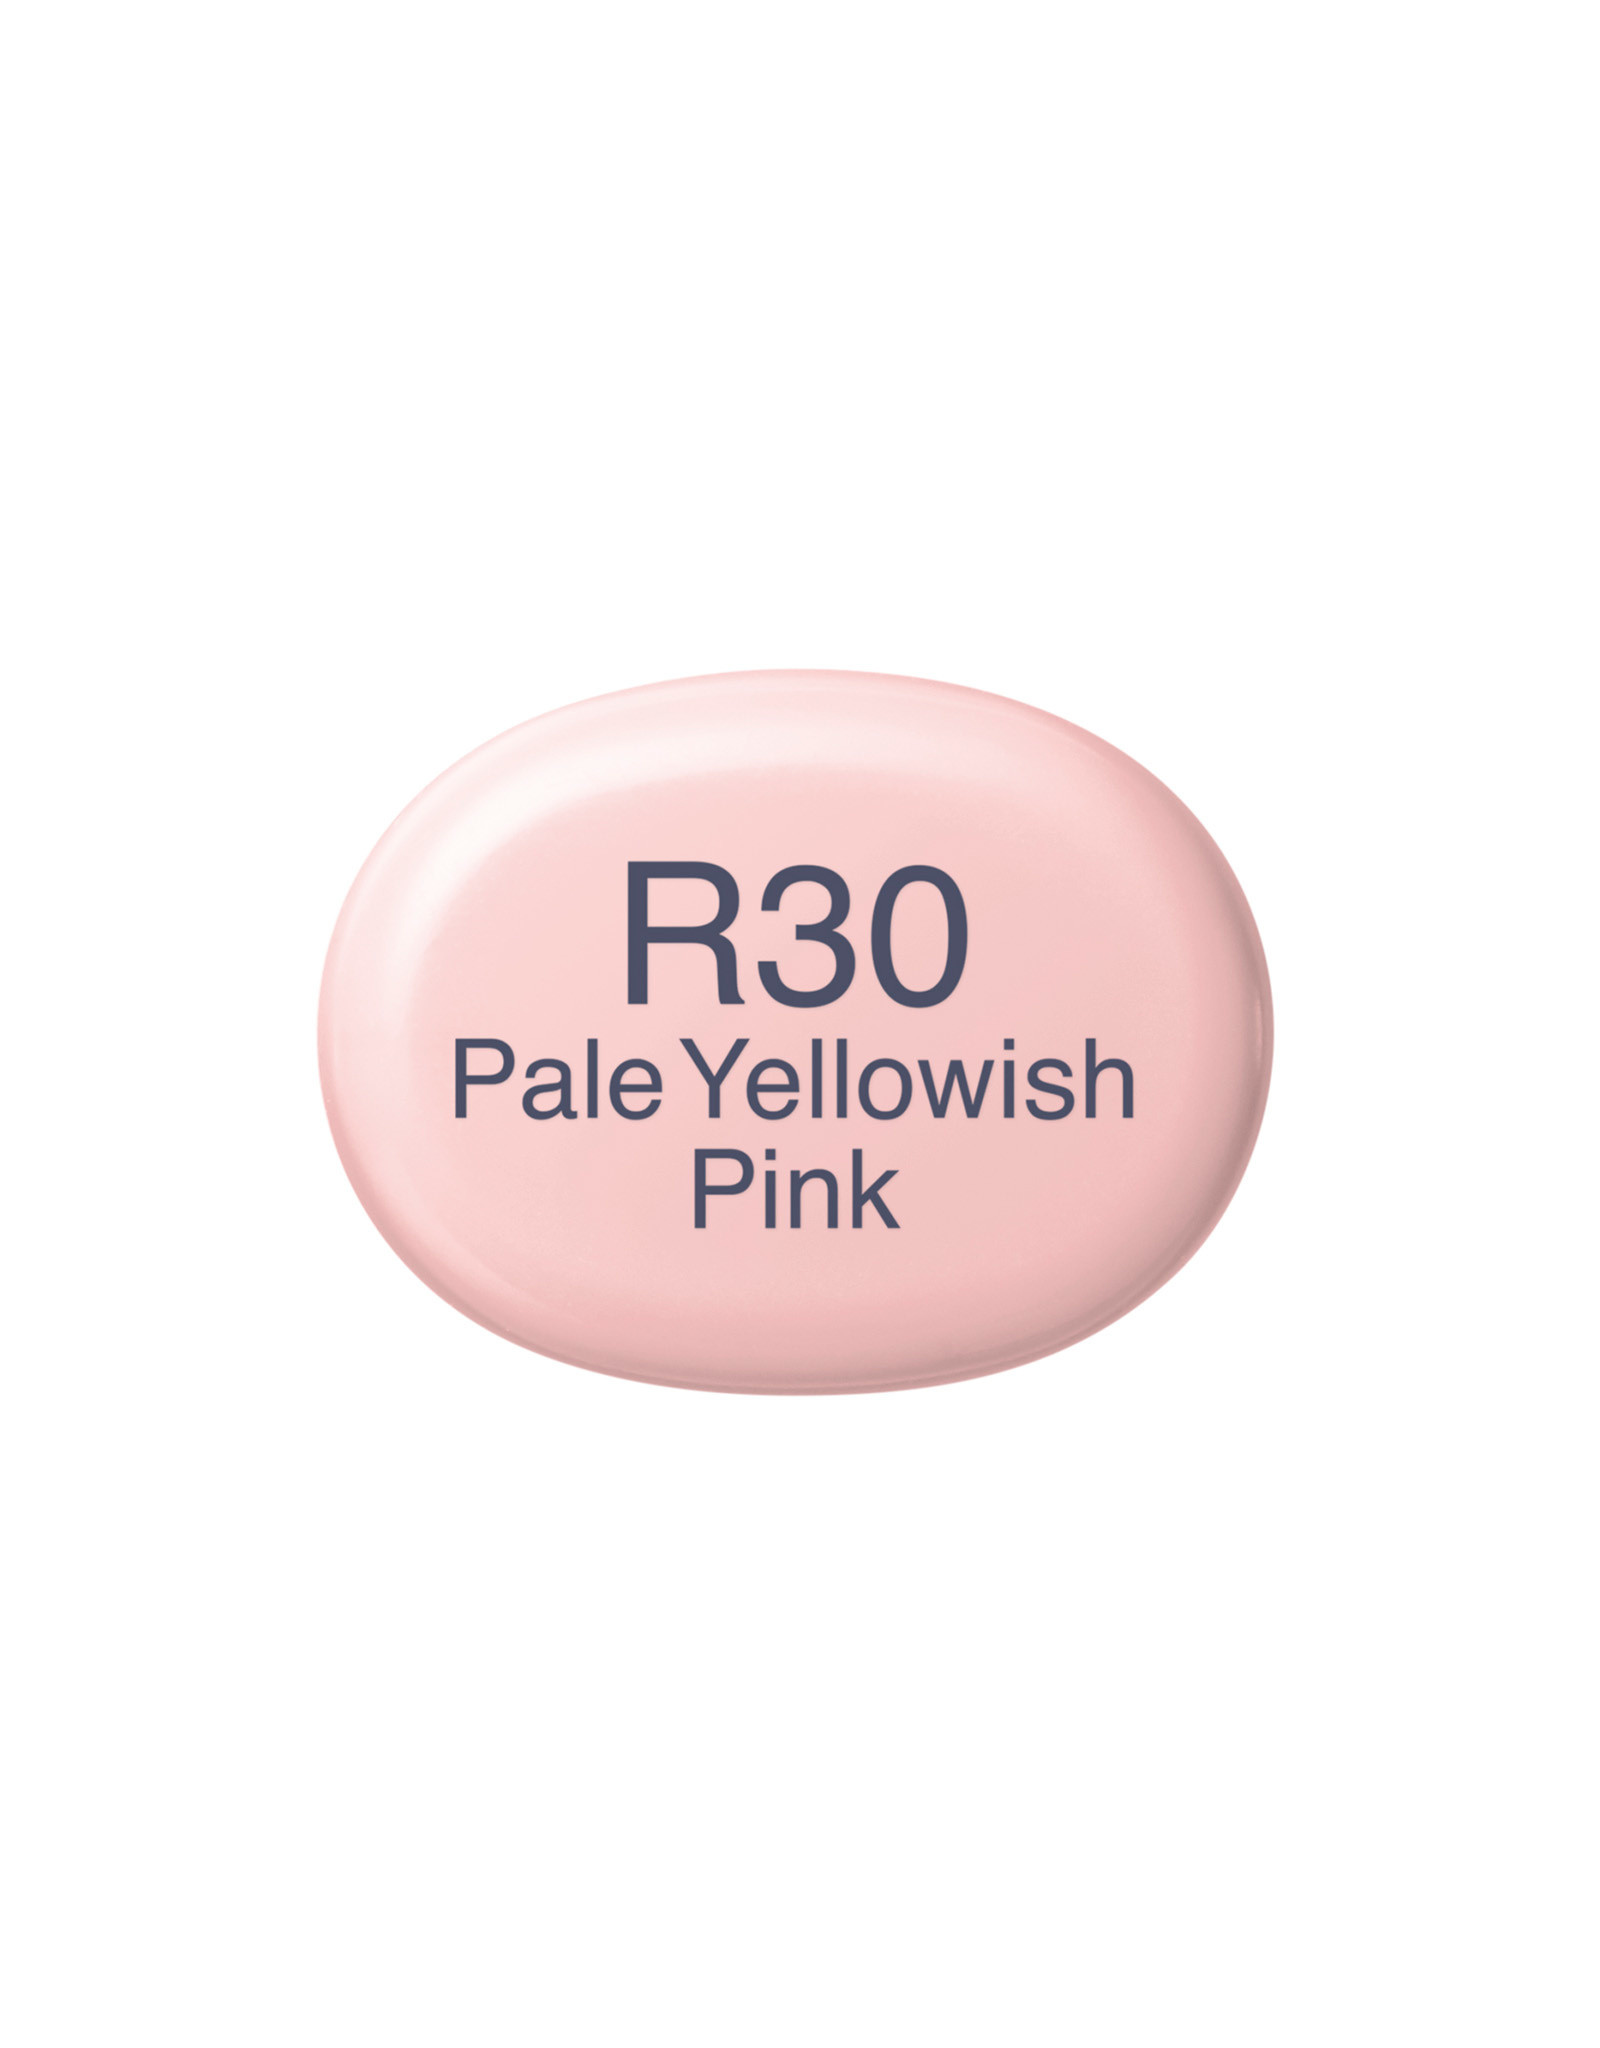 COPIC COPIC Sketch Marker R30 Pale Yellow Pink